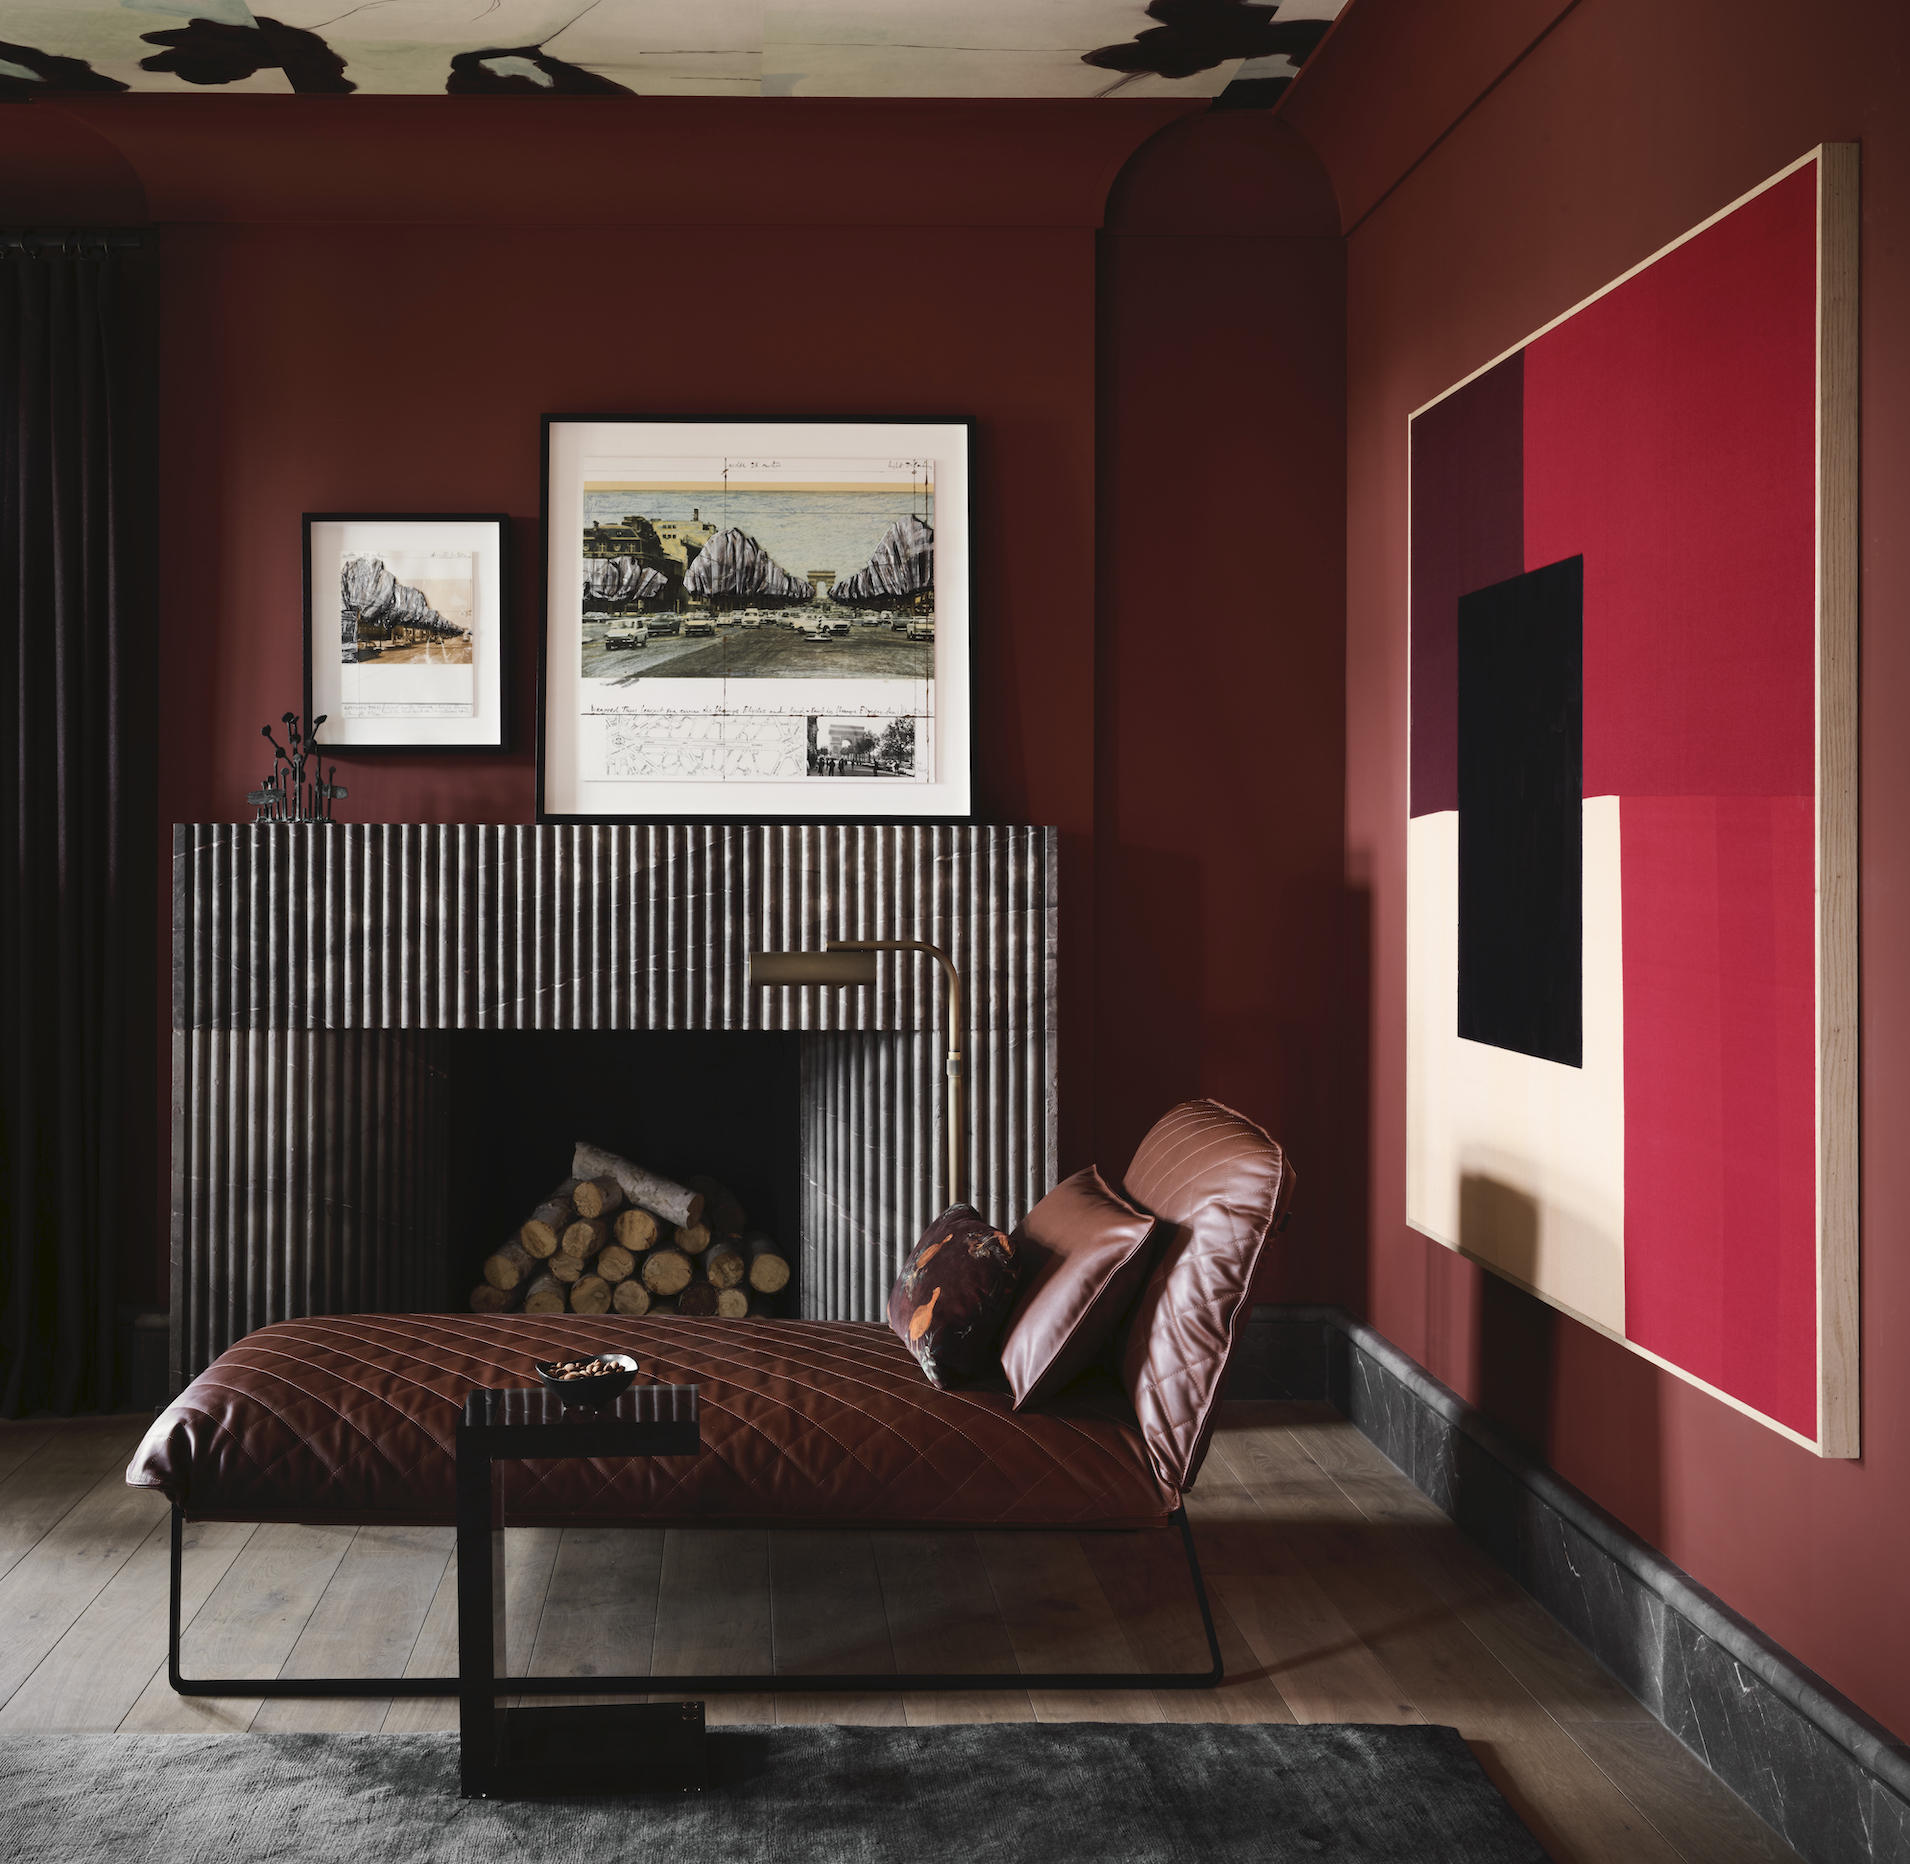 Chad Dorsey creates a perfect union of modernist art, mid-century design, geometric lines and a red-spectrum palette in this San Francisco Designer Showhouse